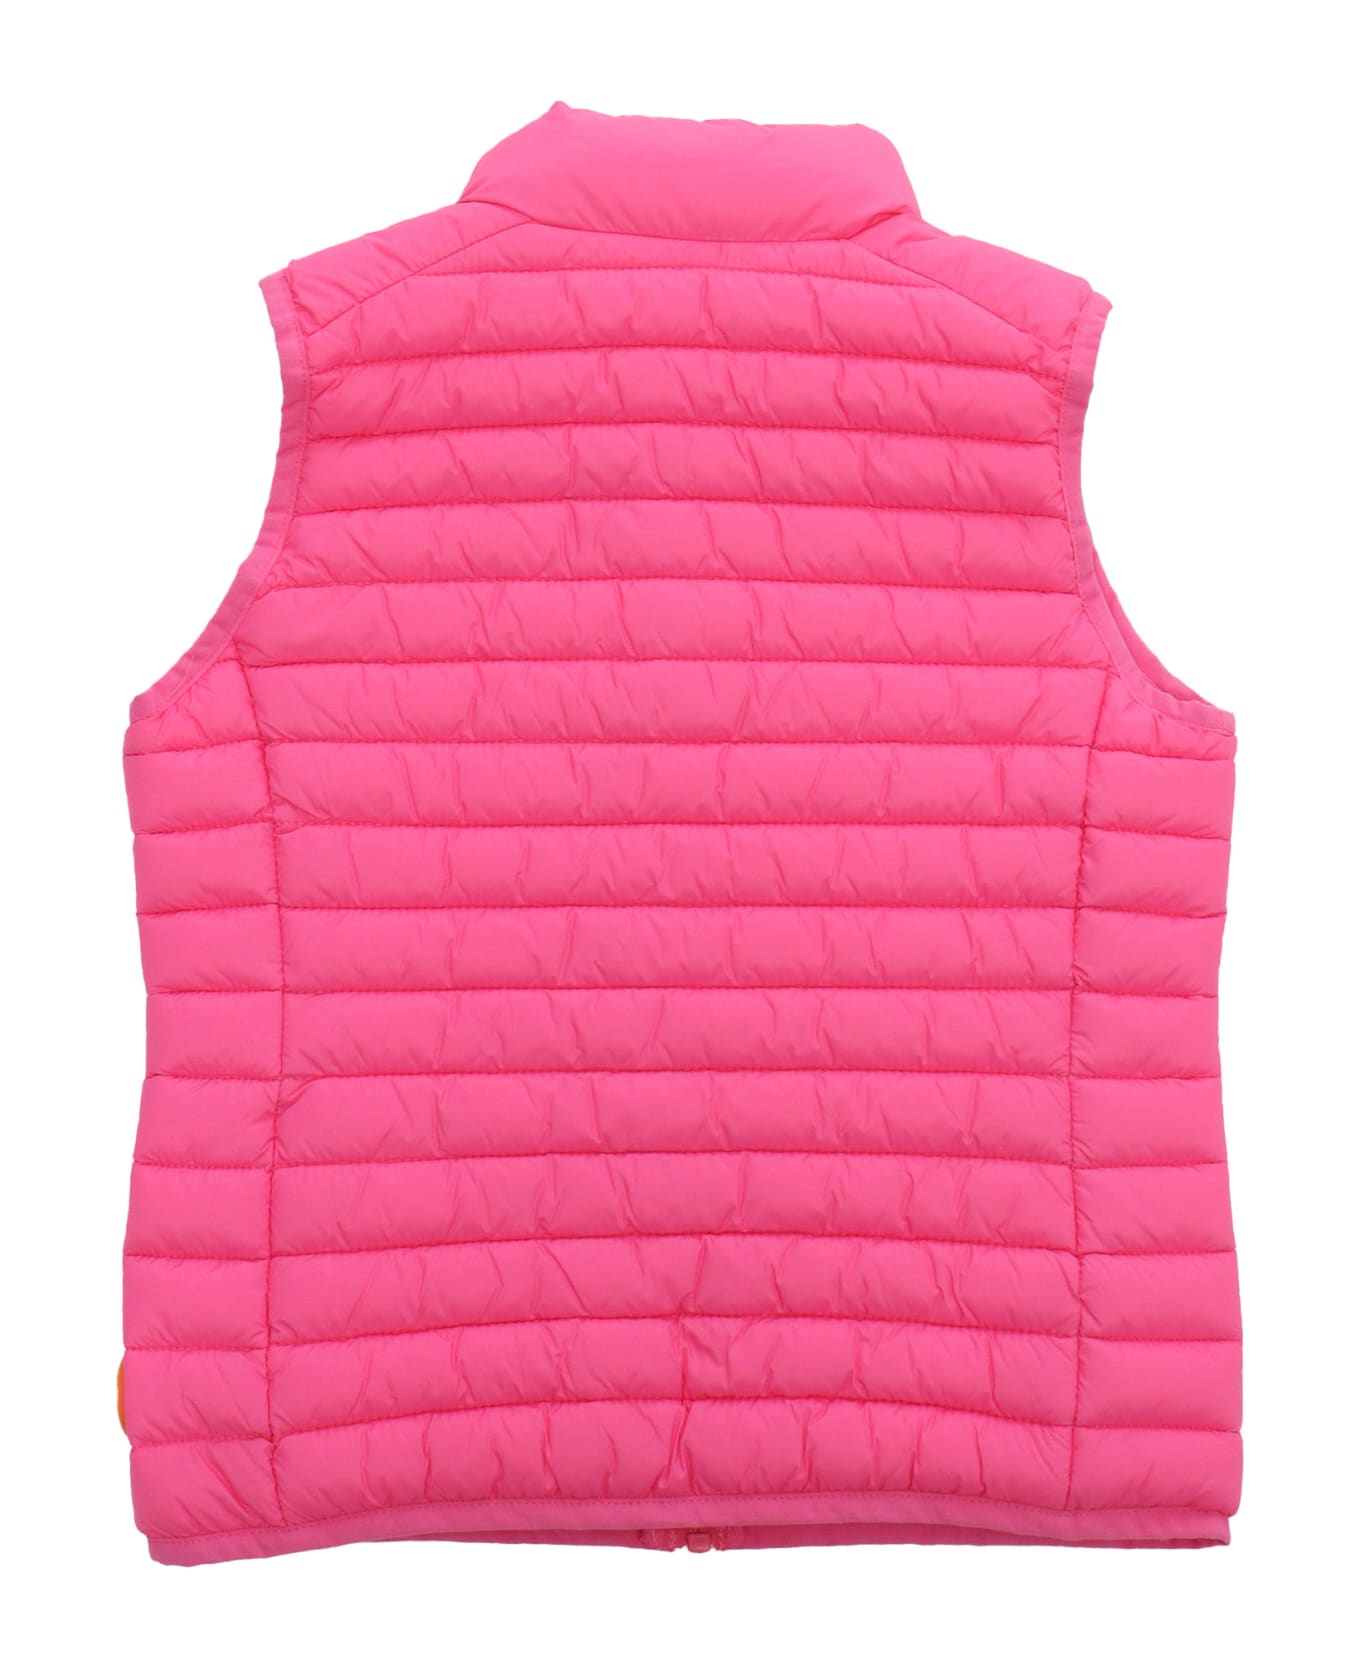 Save the Duck Padded Vest For Girls - PINK